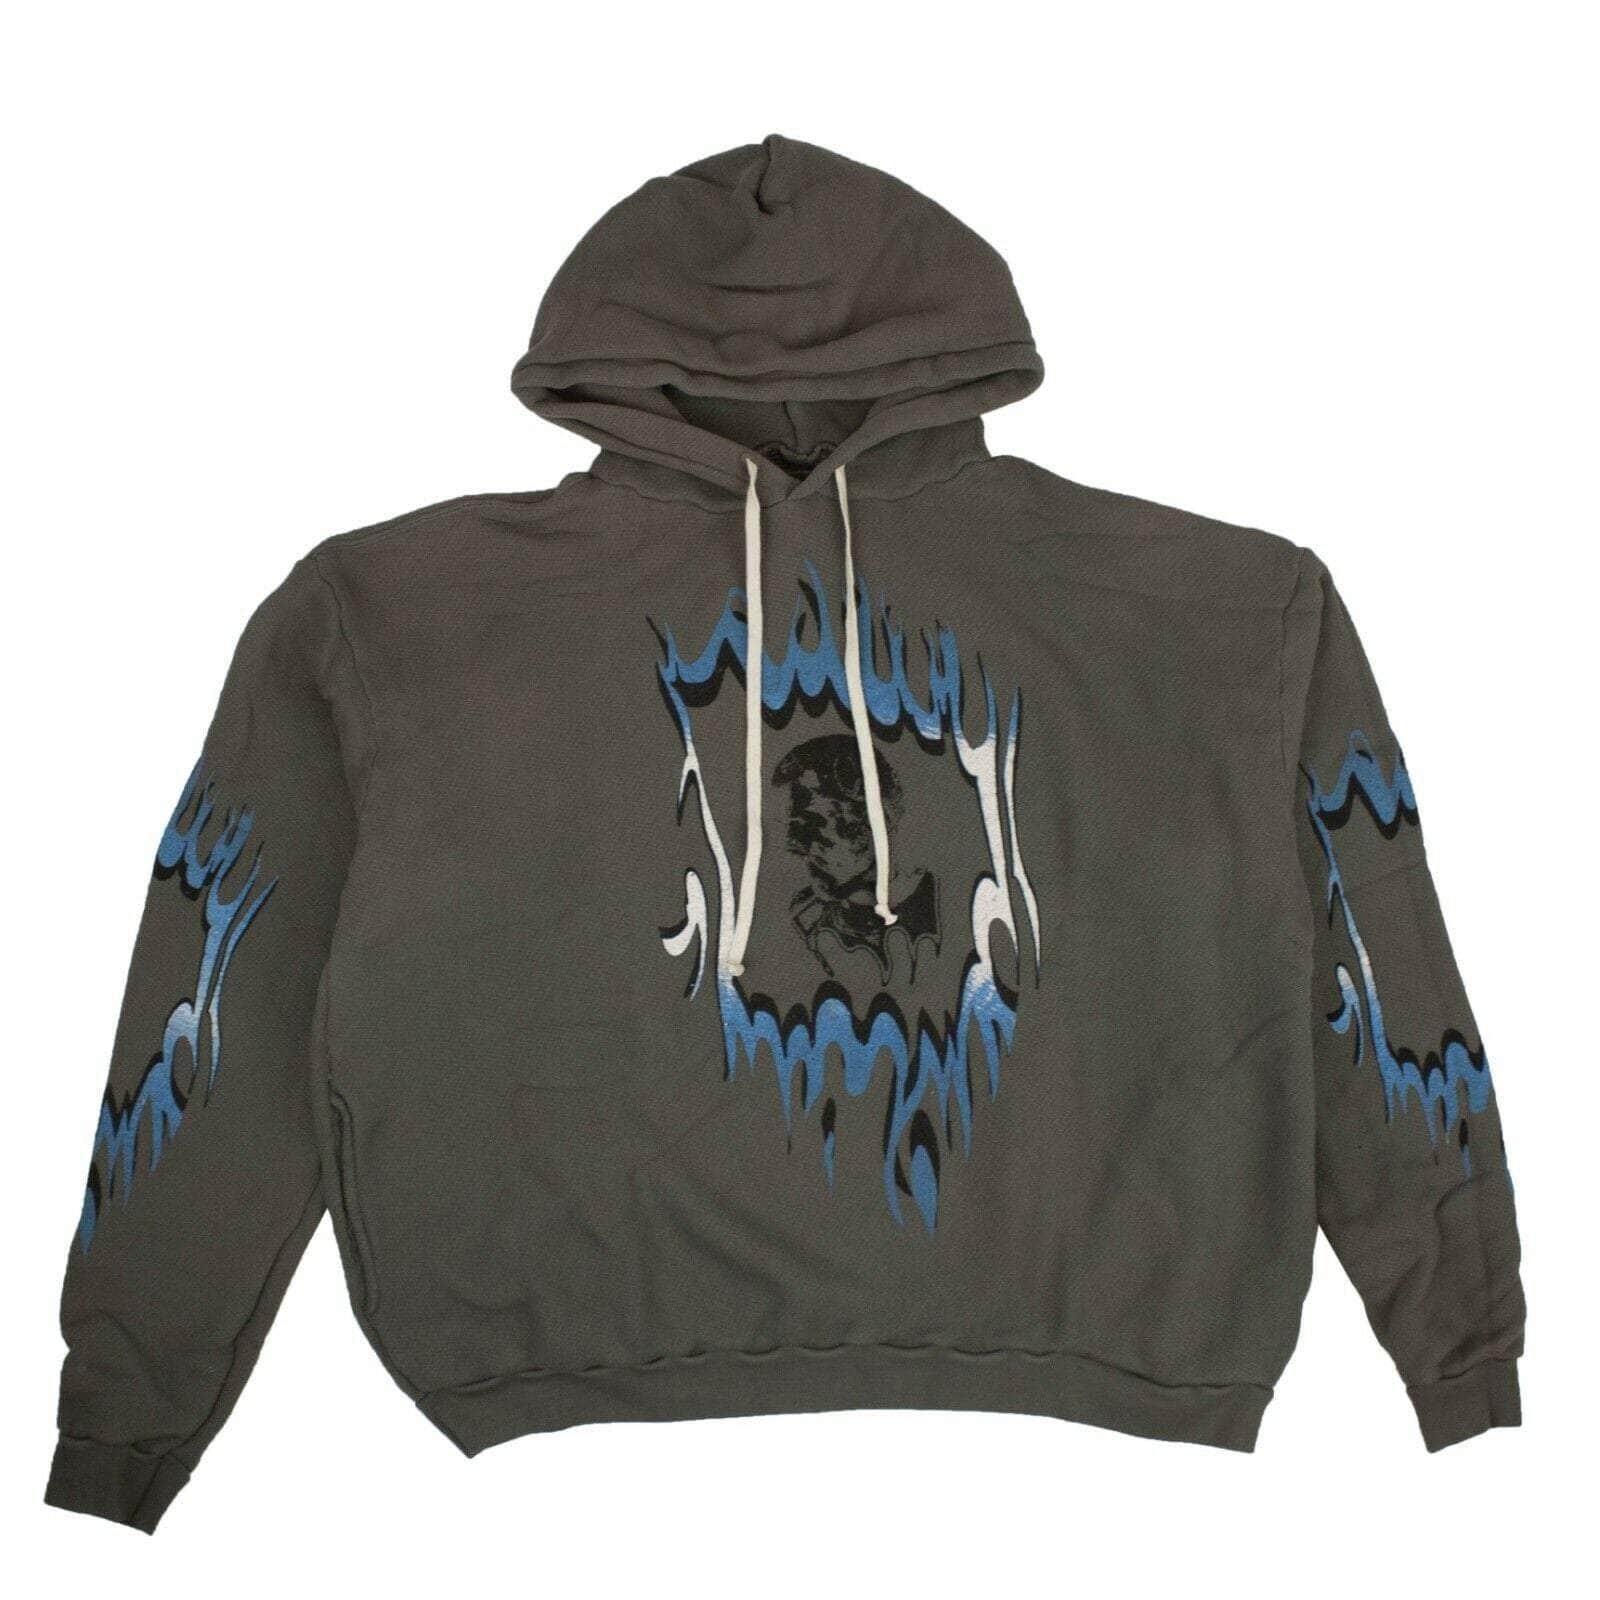 Shop 375™ 250-500, channelenable-all, couponcollection, gender-mens, main-clothing, size-l, size-m, size-s M / GREY_PEACEHEAD_HOODIE NWT SIBERIA HILLS Gray 'Peacehead' Hoodie 75LE-1823/M 75LE-1823/M